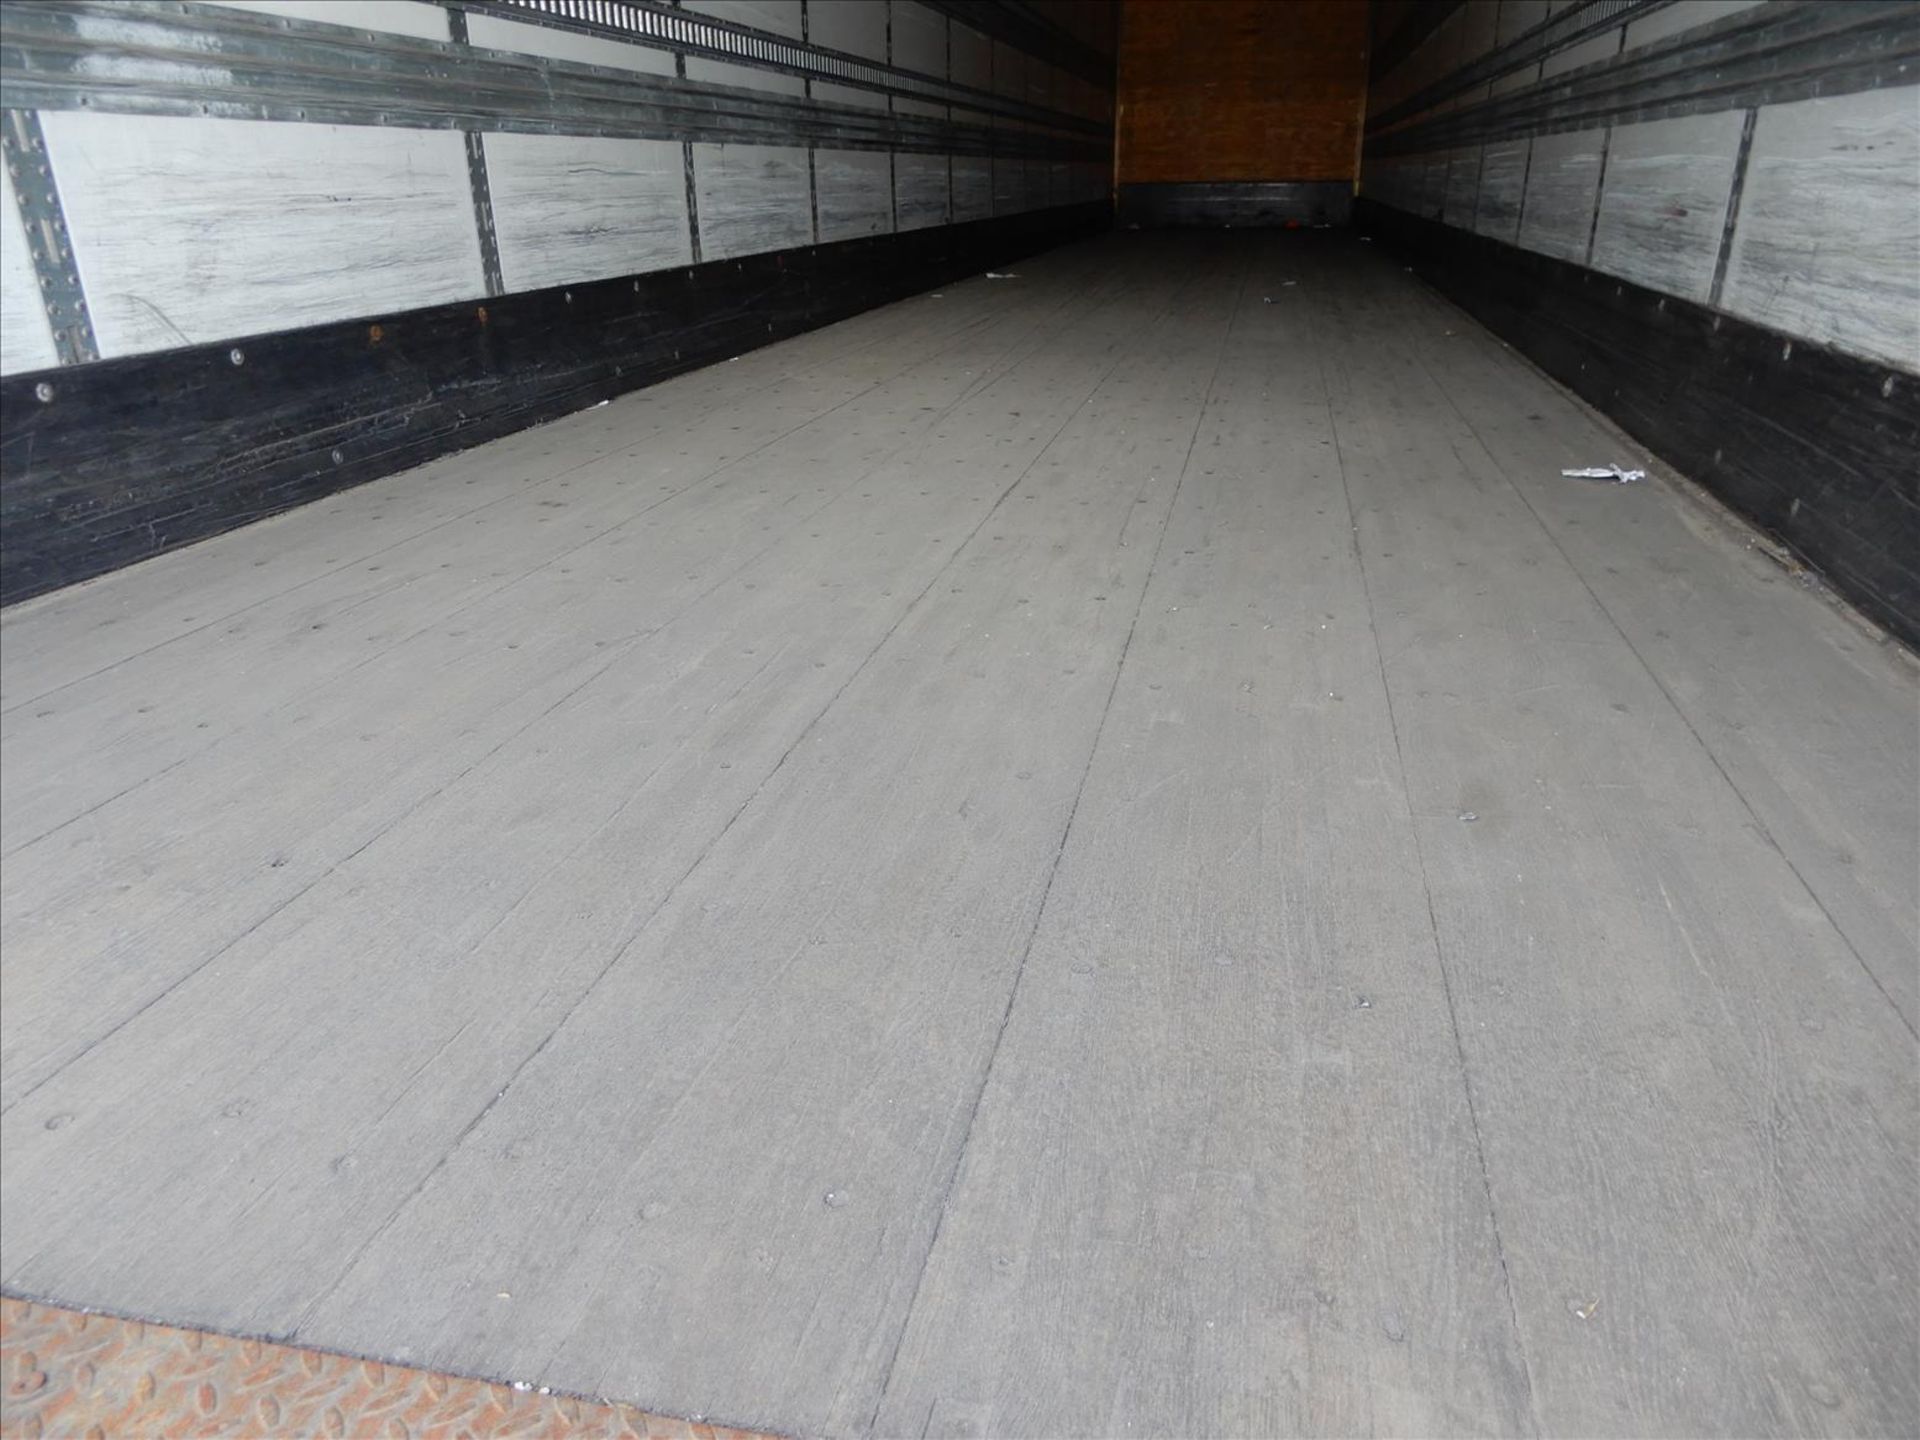 2012 Stoughton Trailer - Located in Indianapolis, IN - Image 28 of 31